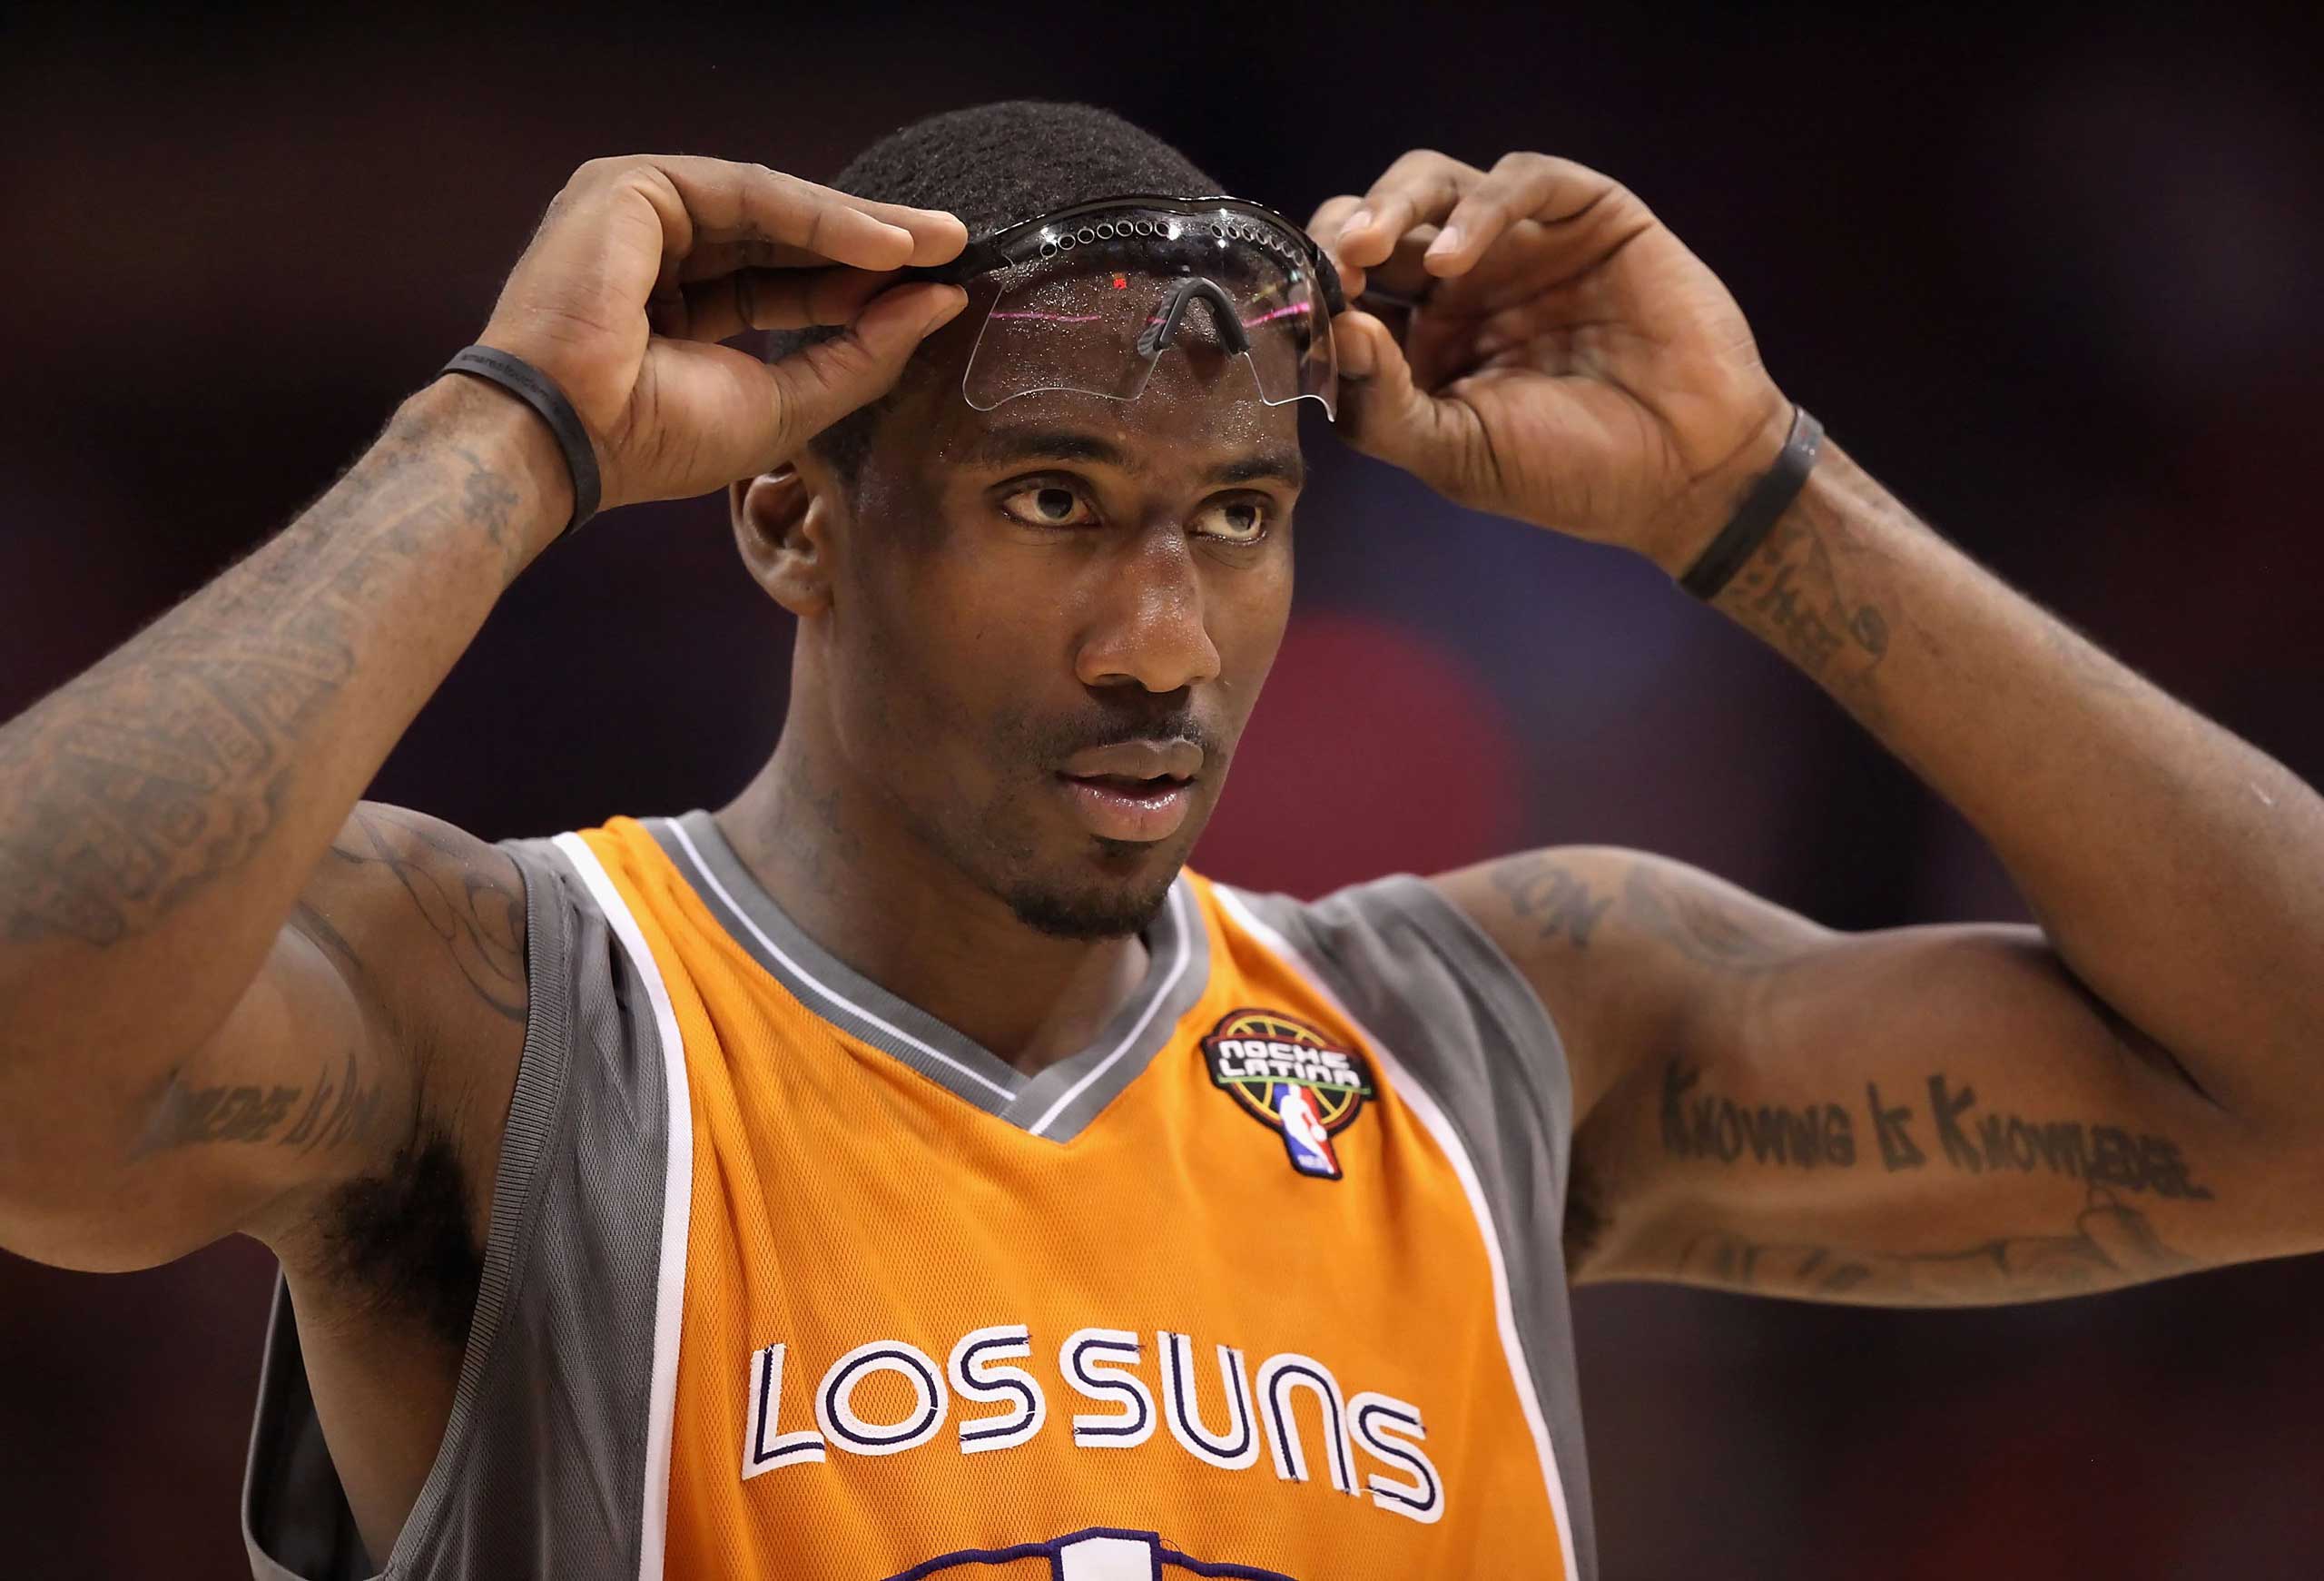 In 2010, the Phoenix Suns wore jerseys emblazoned with  Los Suns  on Cinco de Mayo, in response to an anti-immigration law recently passed in Arizona. (Christian Petersen--Getty Images)